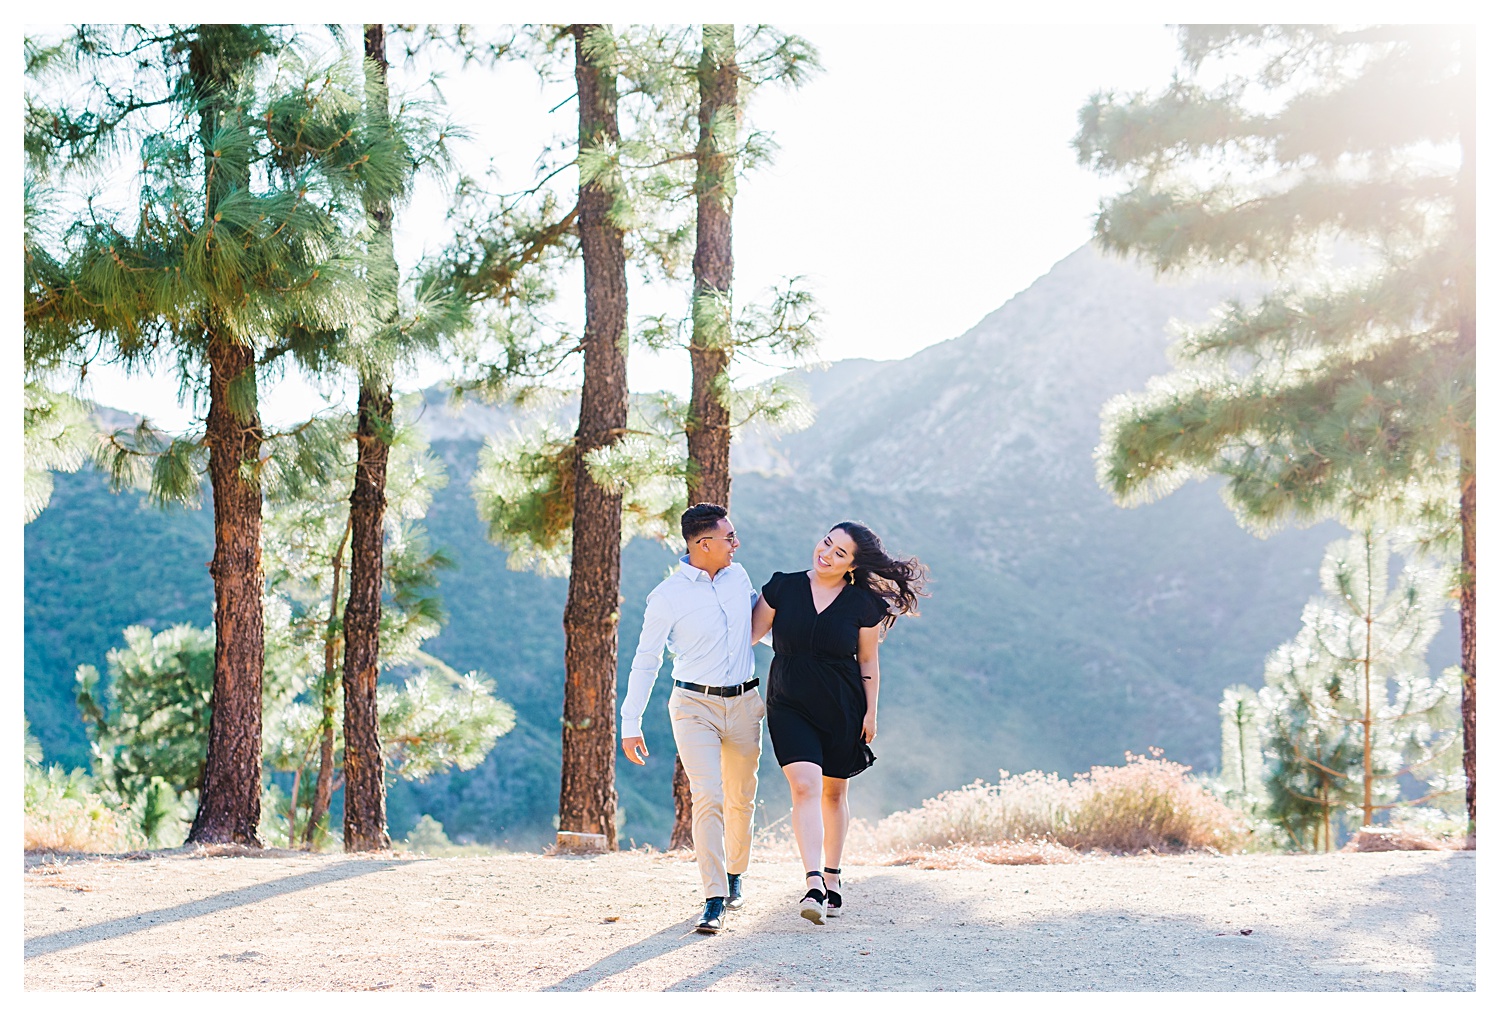 Angeles National Forest Engagement Photos couple with arm around each other walking